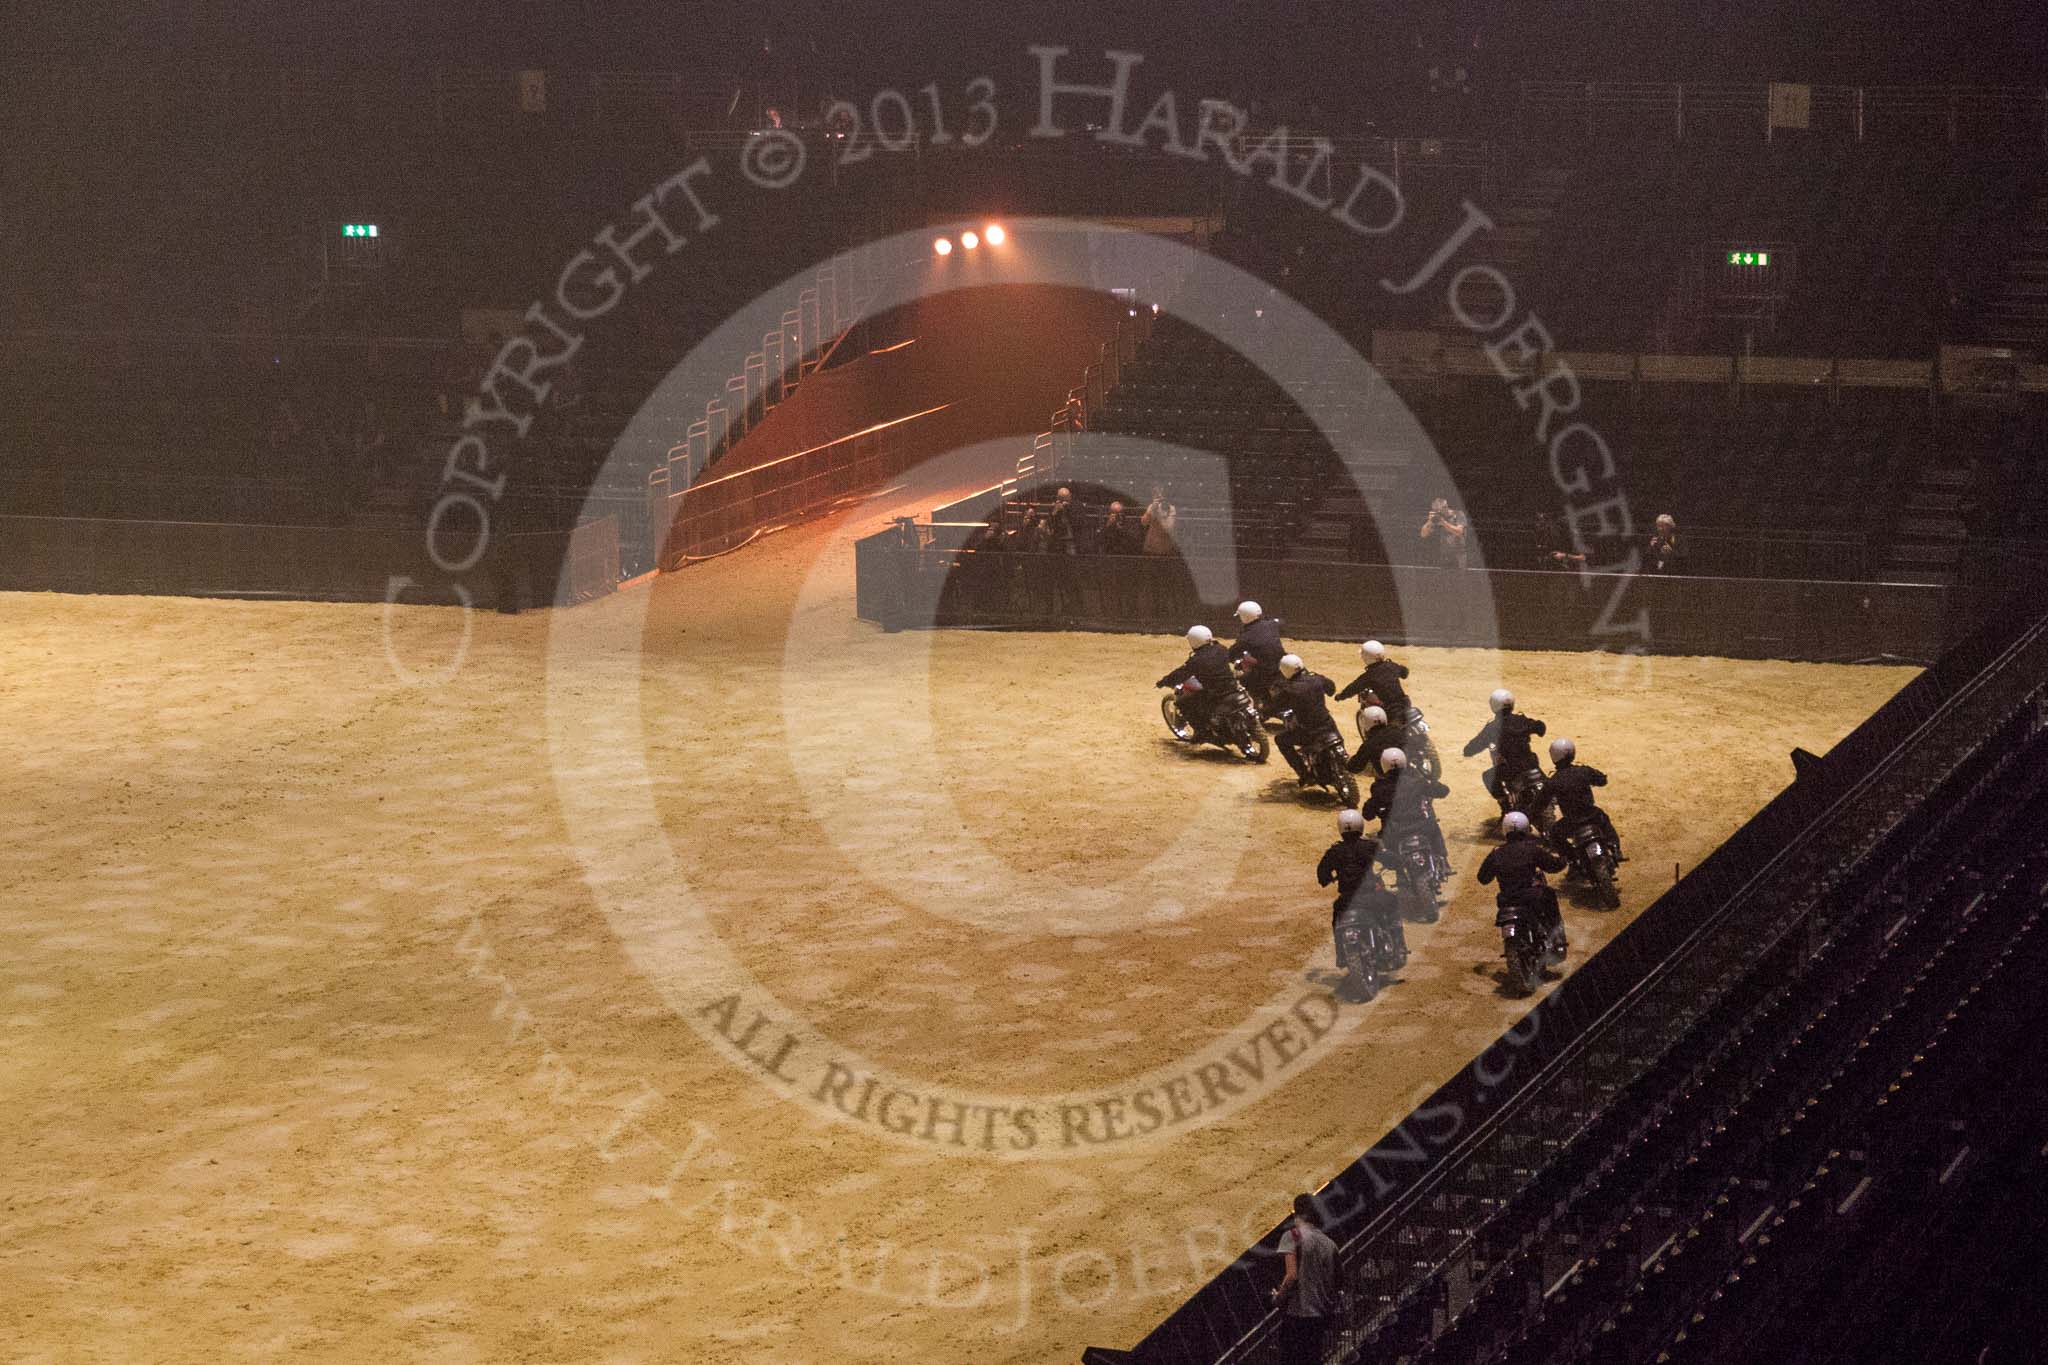 British Military Tournament 2013.
Earls Court,
London SW5,

United Kingdom,
on 06 December 2013 at 15:06, image #93